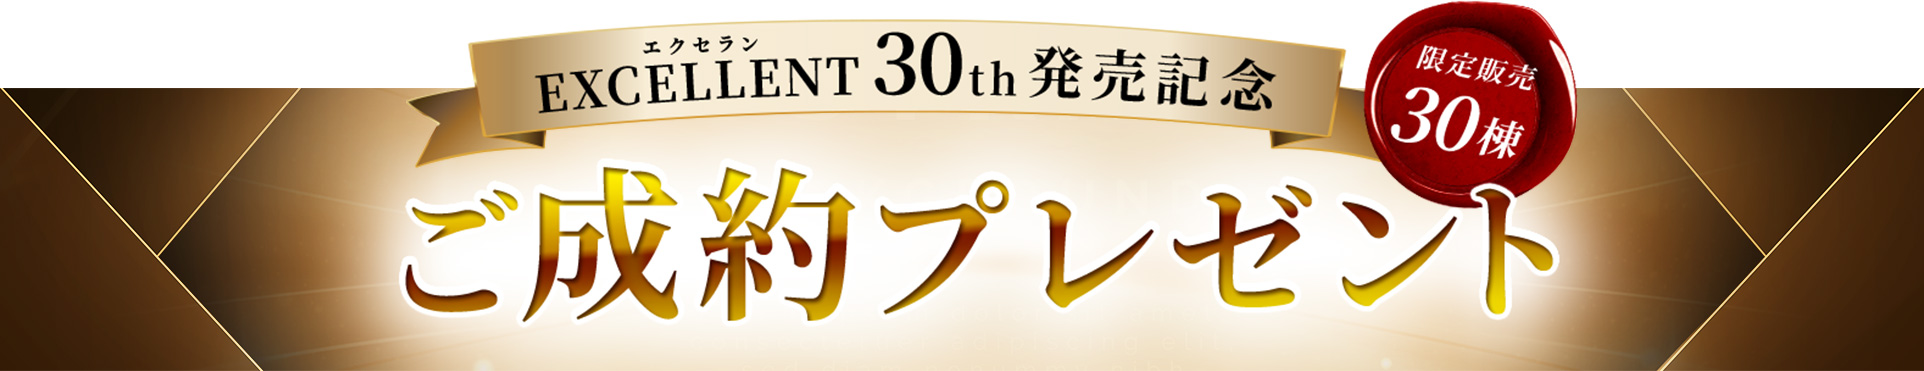 EXCELLENT 30th 発売記念 限定販売30棟 ご成約プレゼント